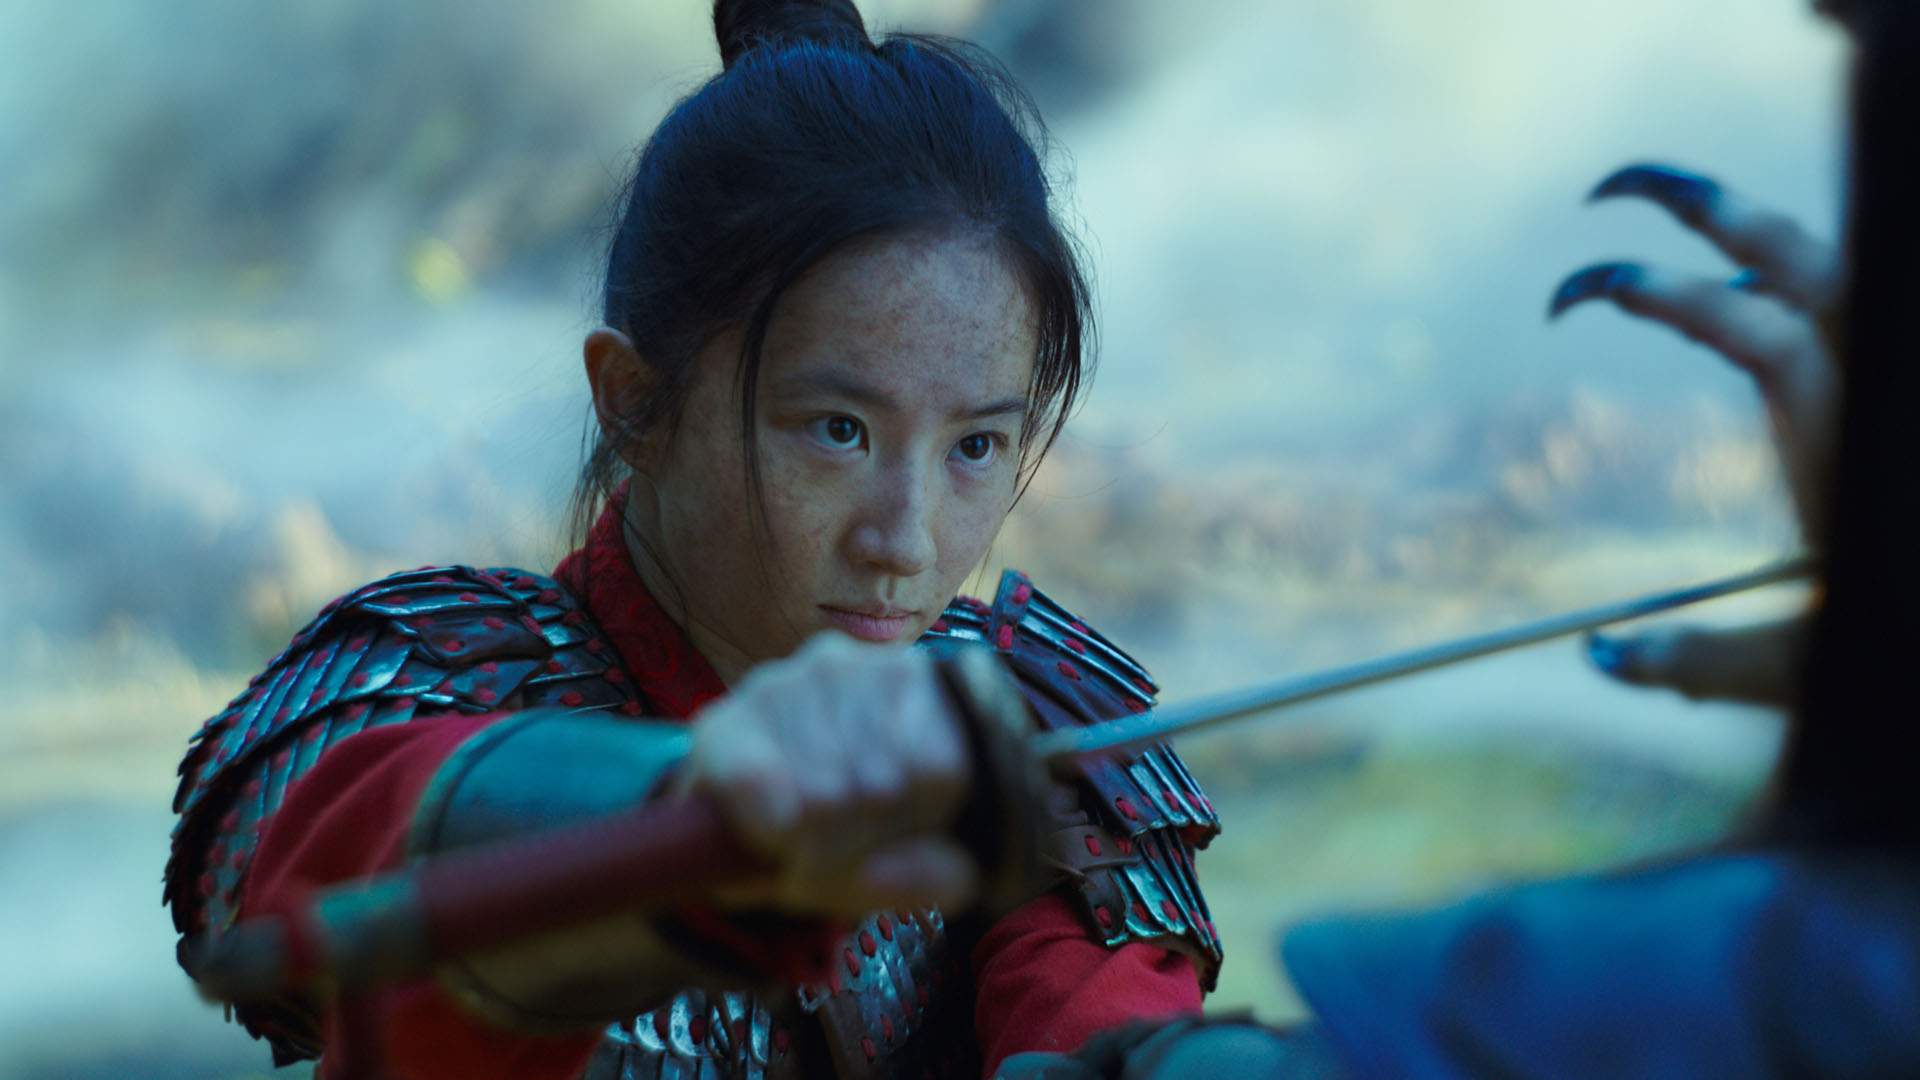 Disney Has Dropped the Action-Packed Full Trailer for Its Live-Action Version of 'Mulan'